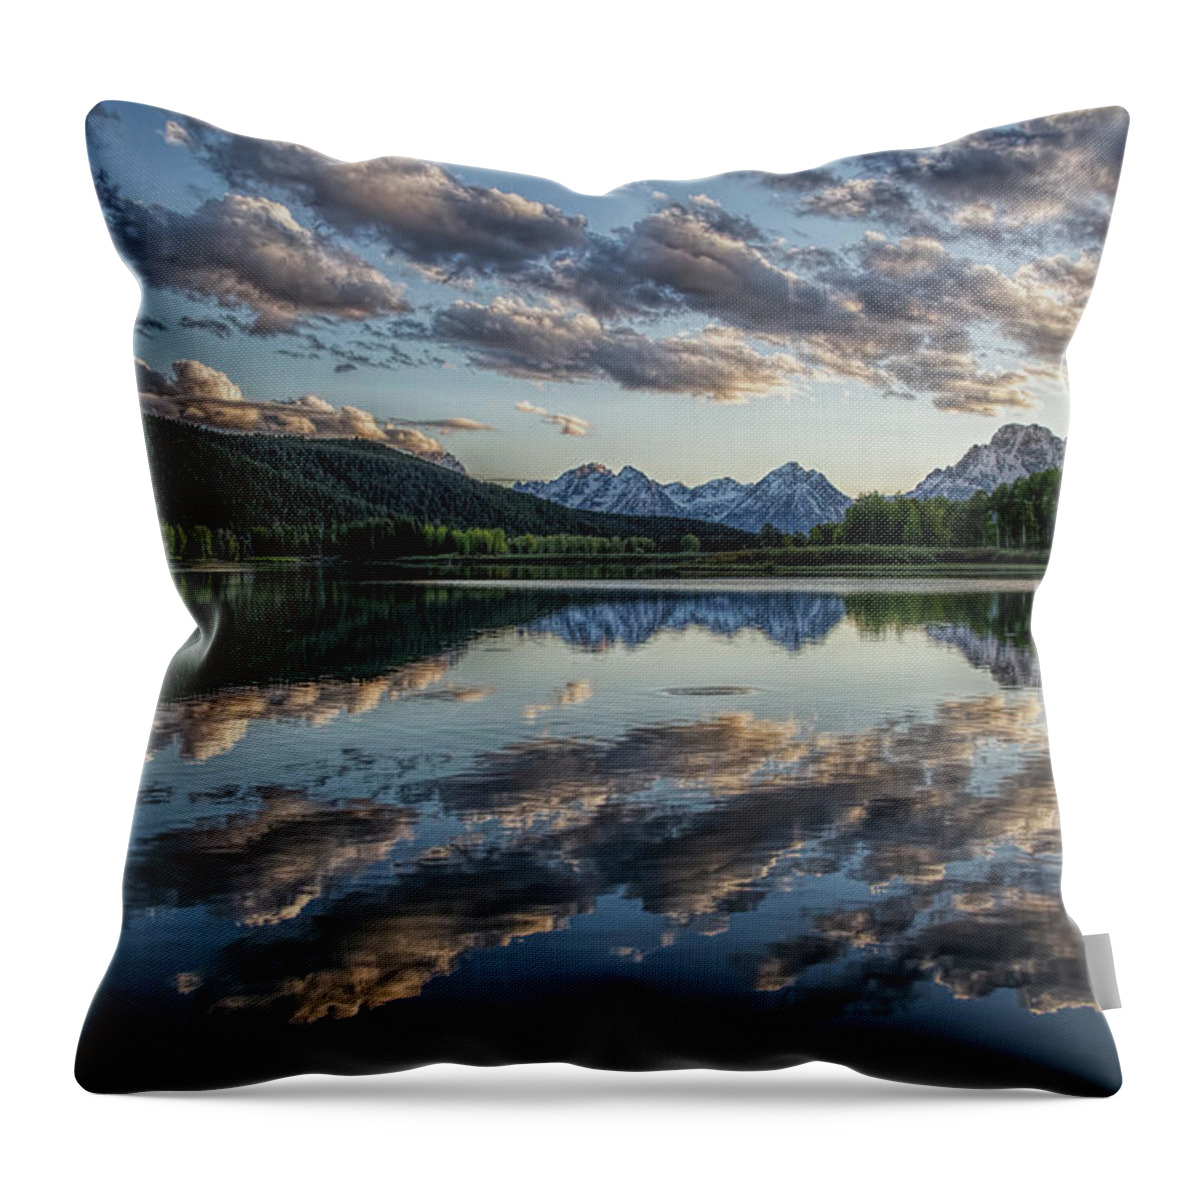 Scenics Throw Pillow featuring the photograph Grand Teton And Snake River by Sandbarrett Photography